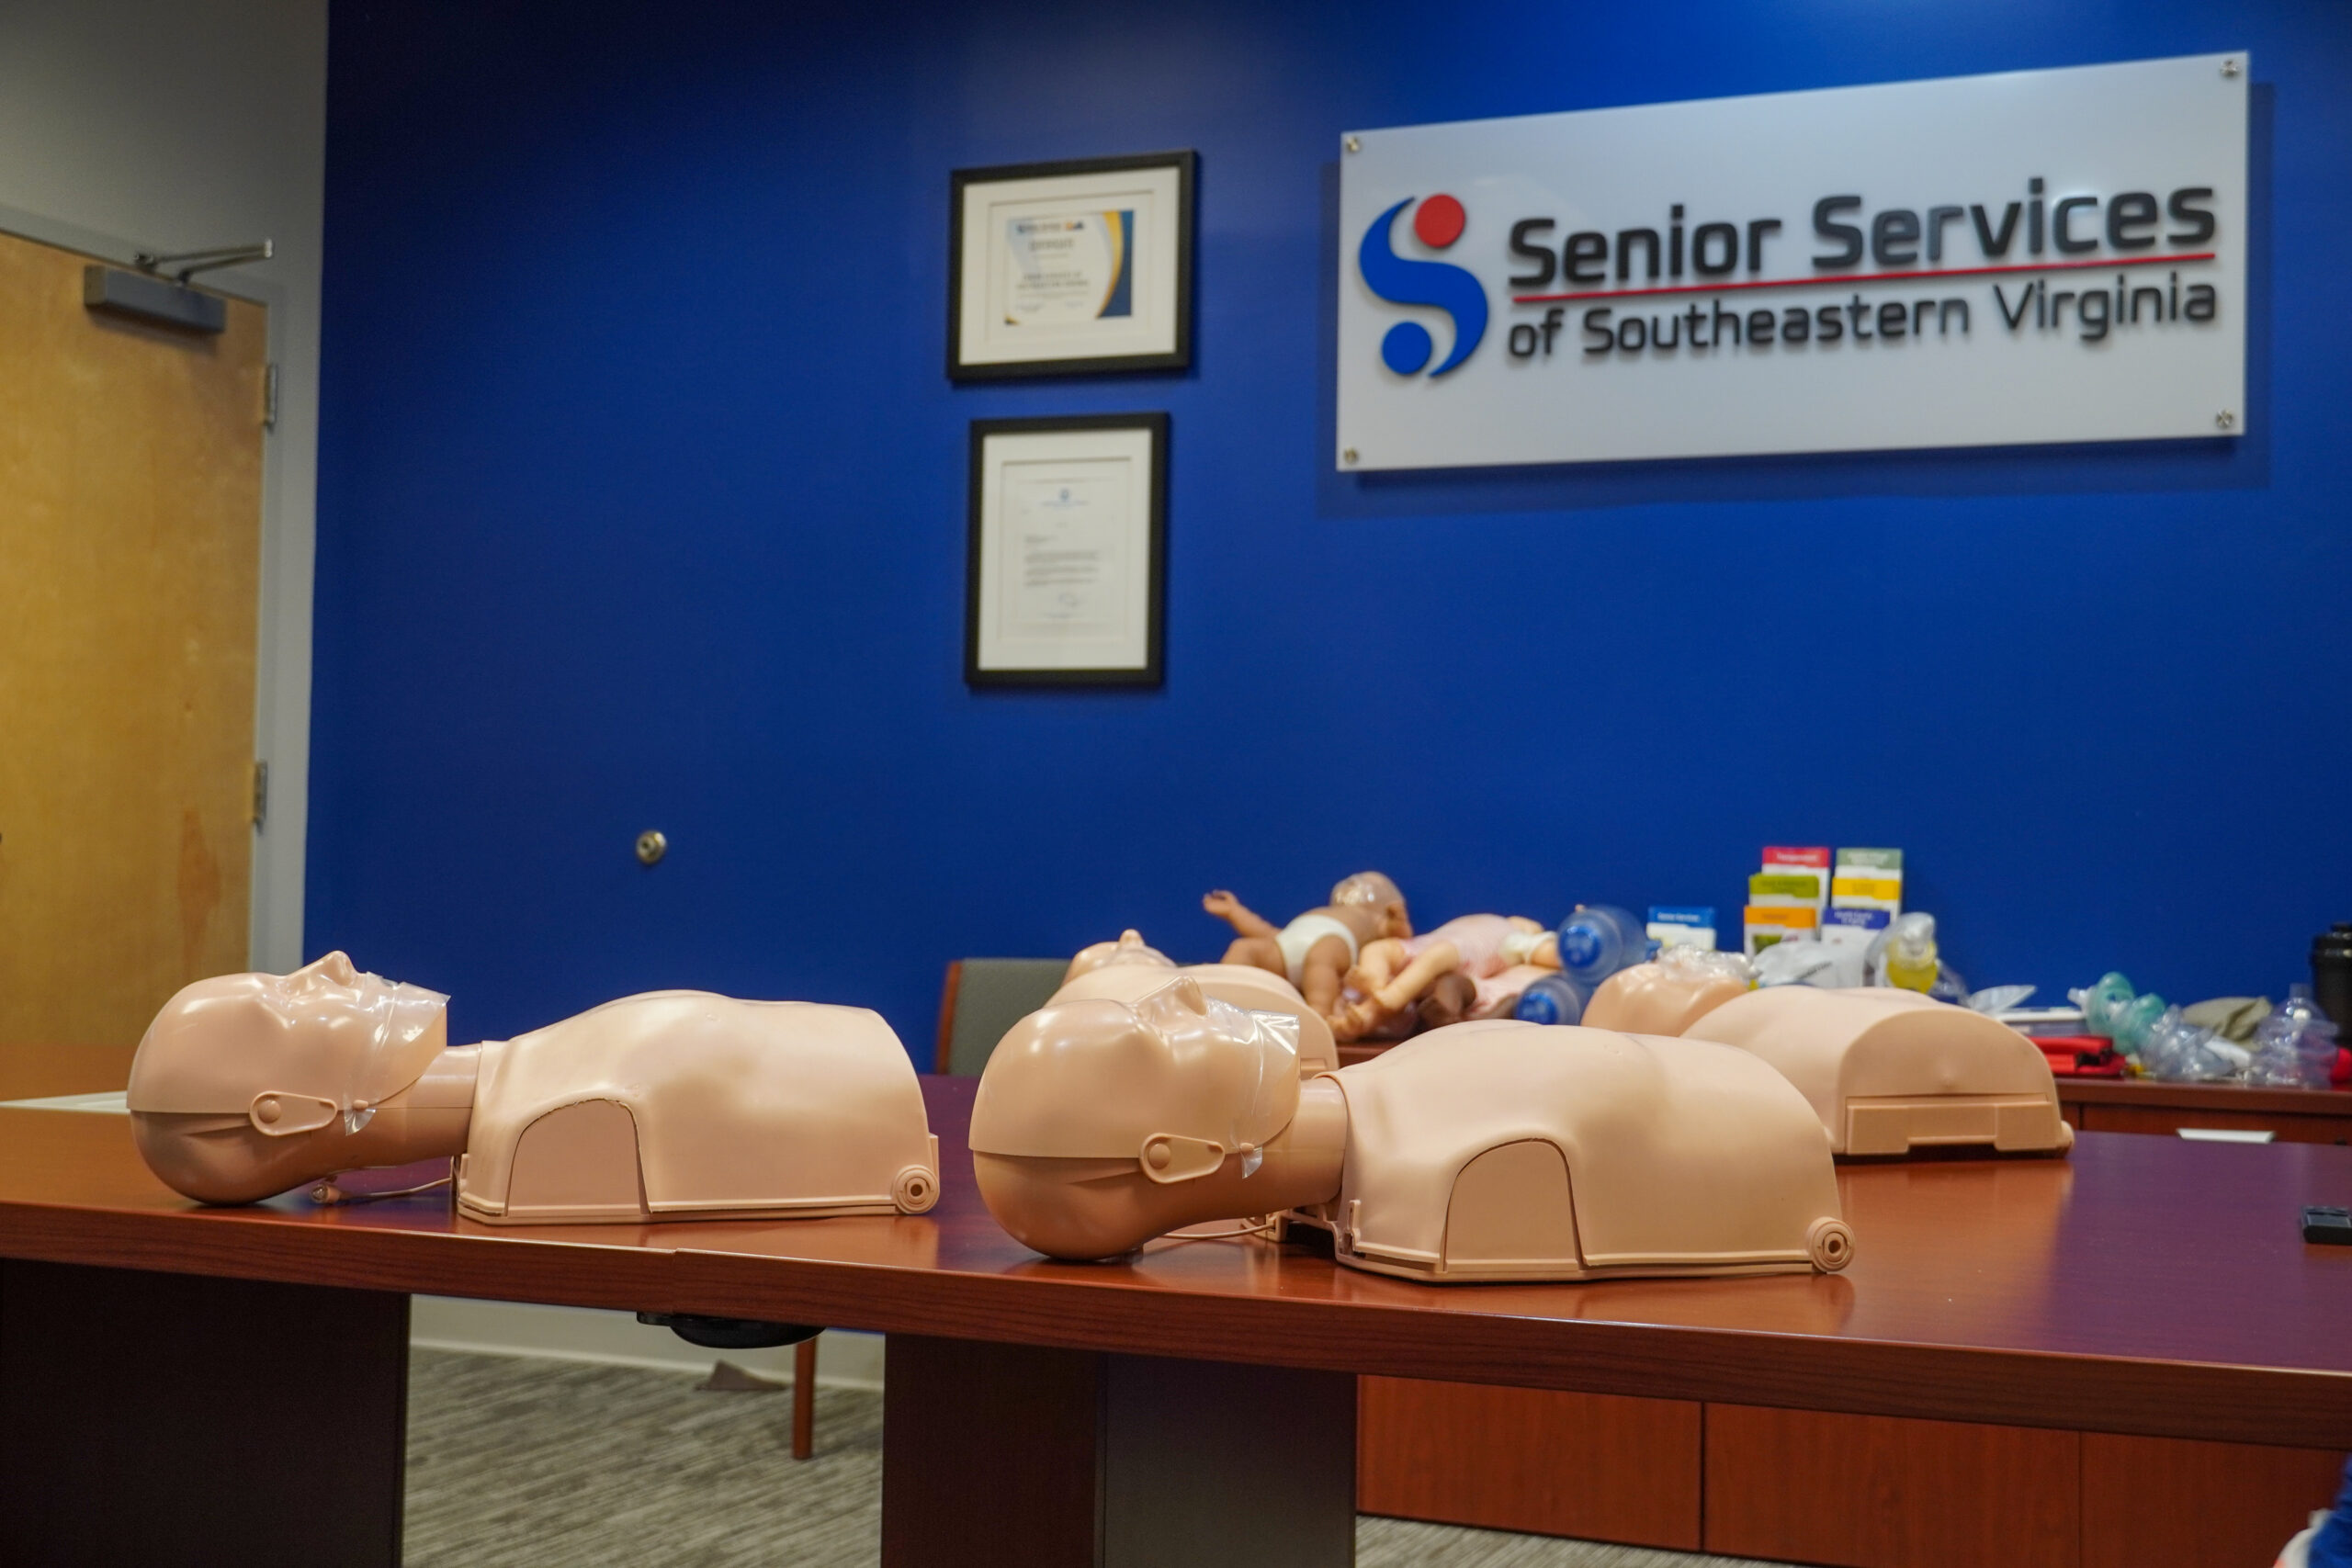 CPR dummies laying on table with Senior Services Logo in background